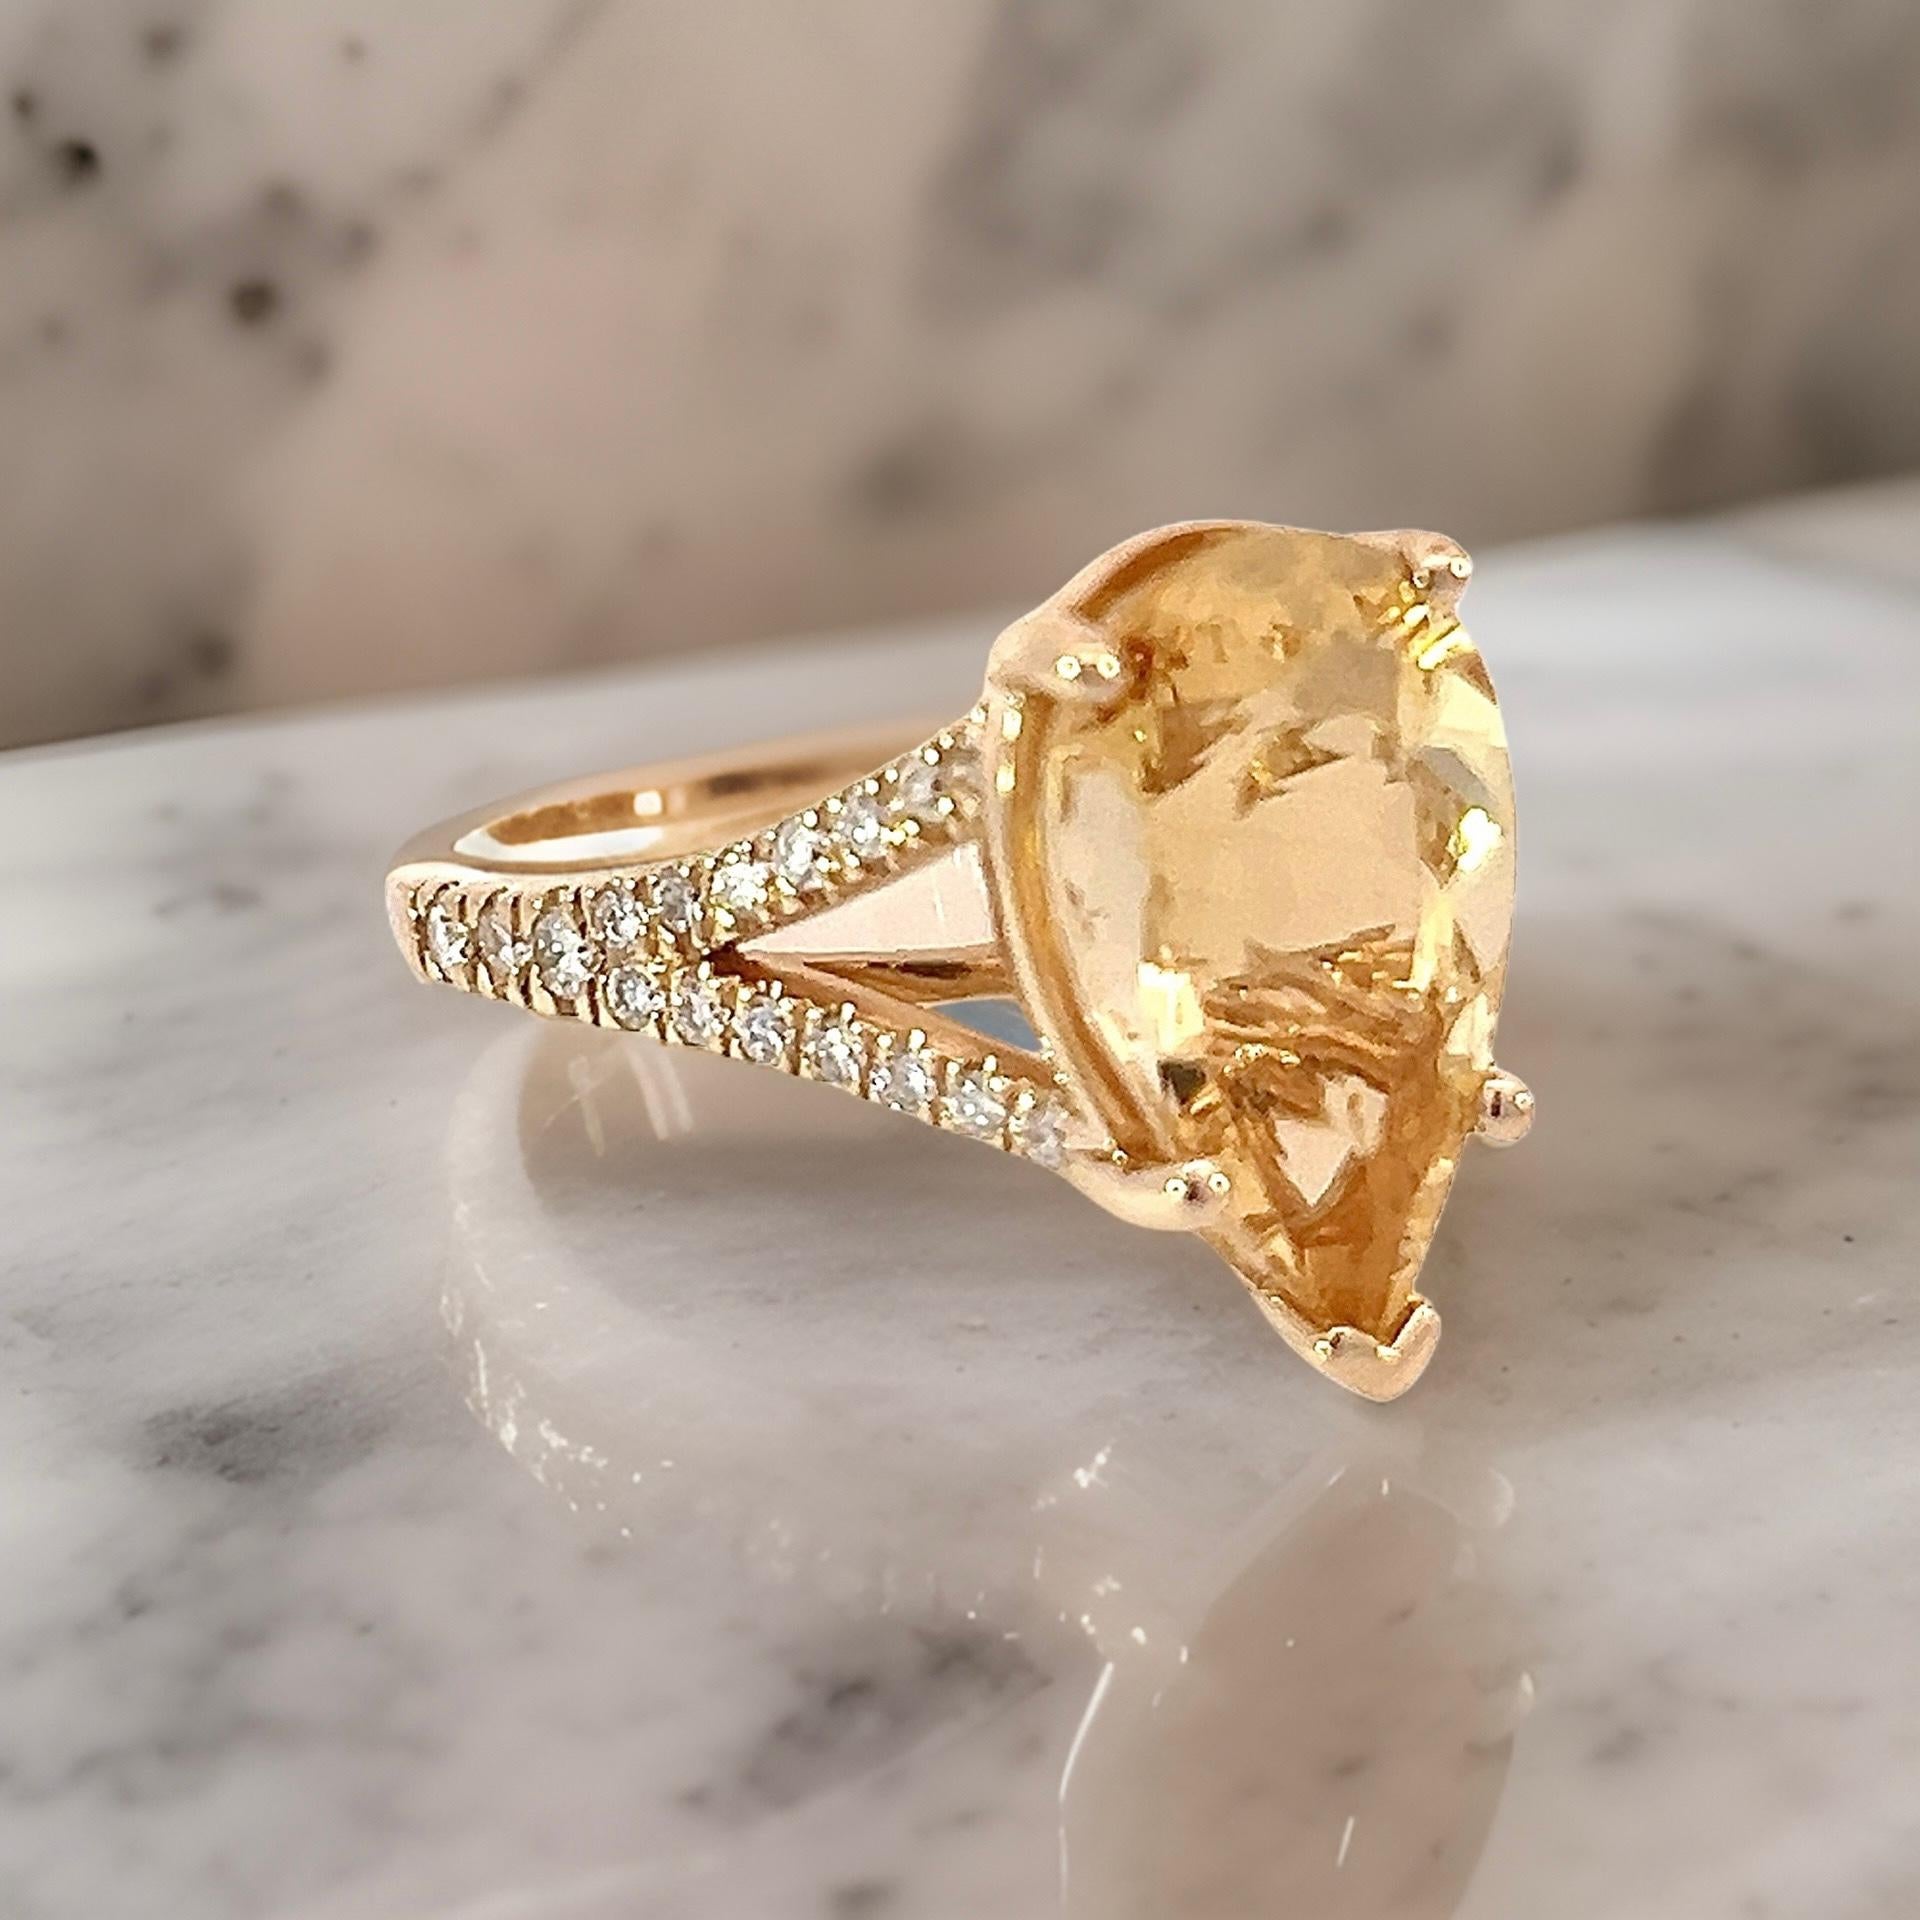 Natural Citrine Diamond Ring 6.5 14k Y Gold 4.79 TCW Certified For Sale 8